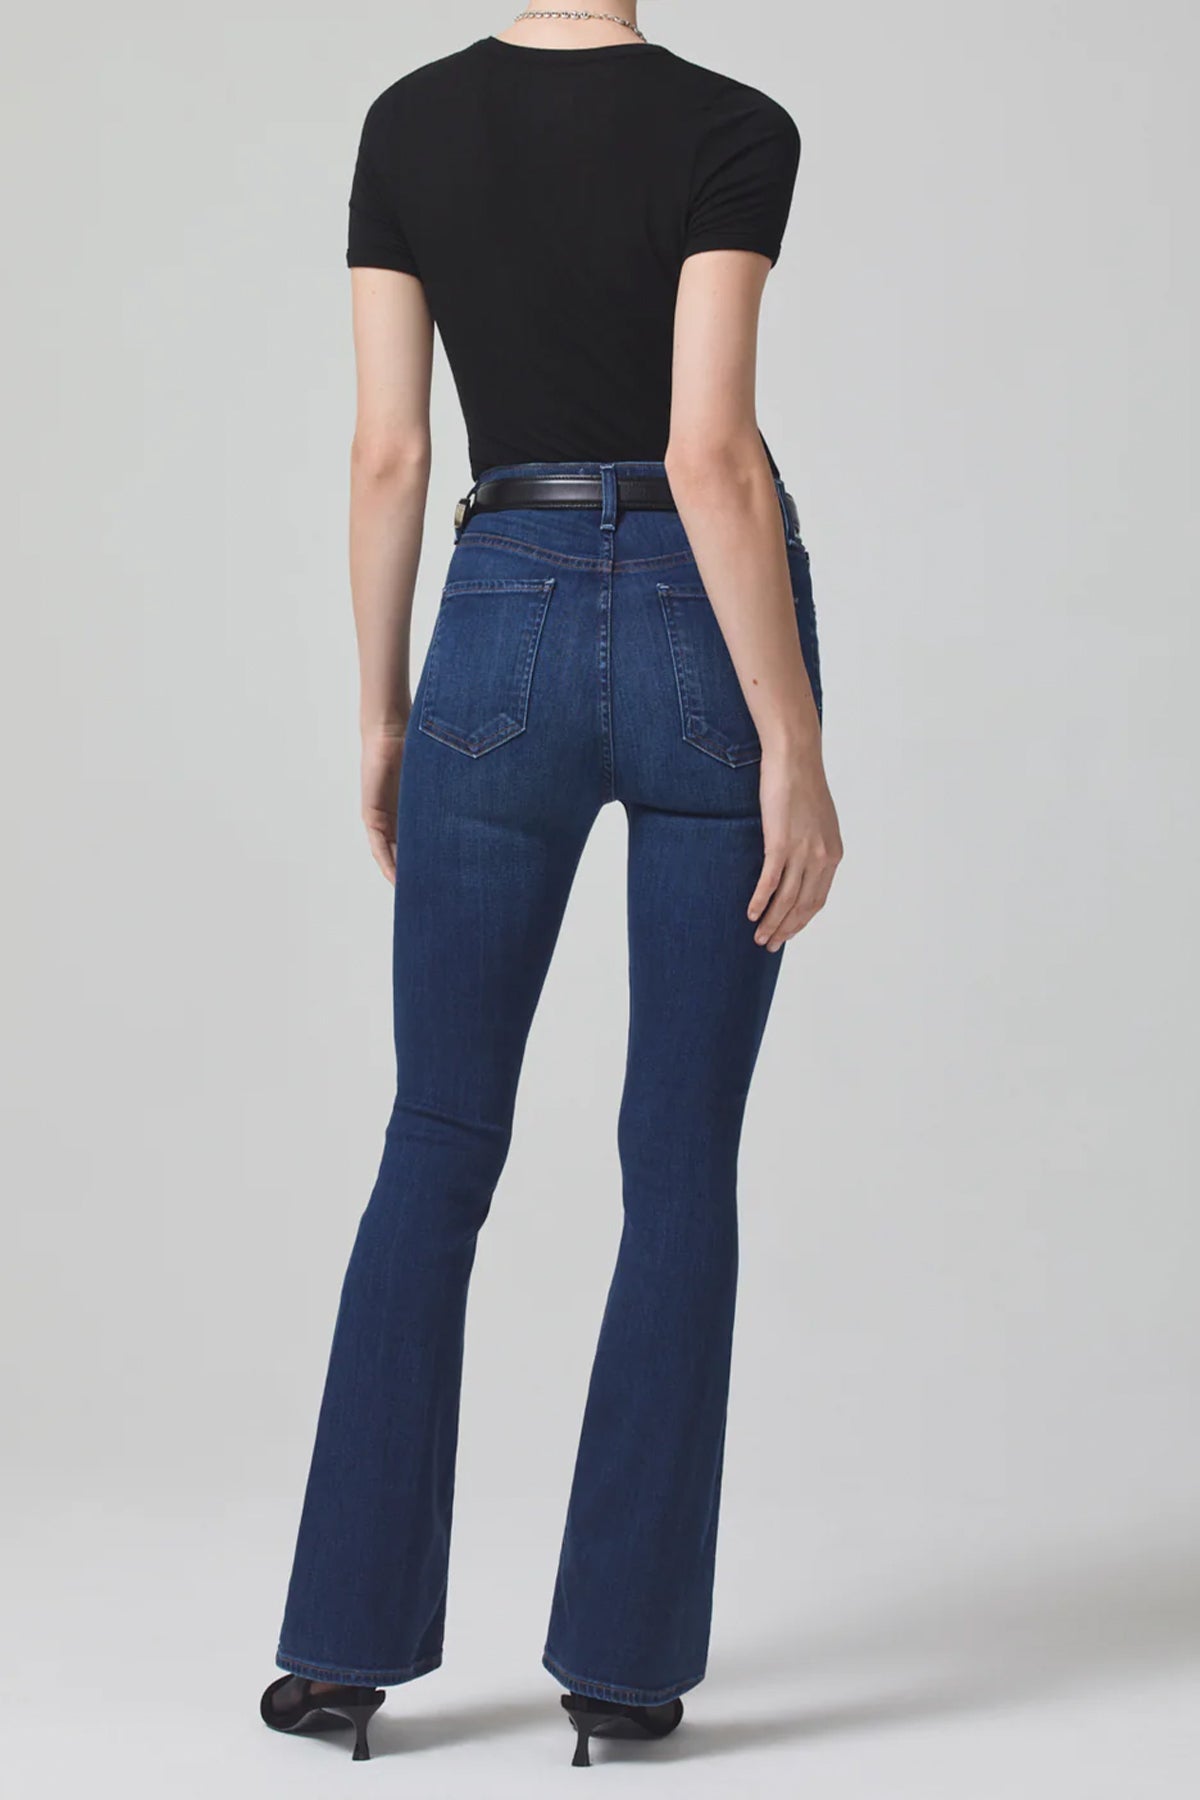 Lilah High Rise Bootcut 30" Jean in Provance - shop-olivia.com